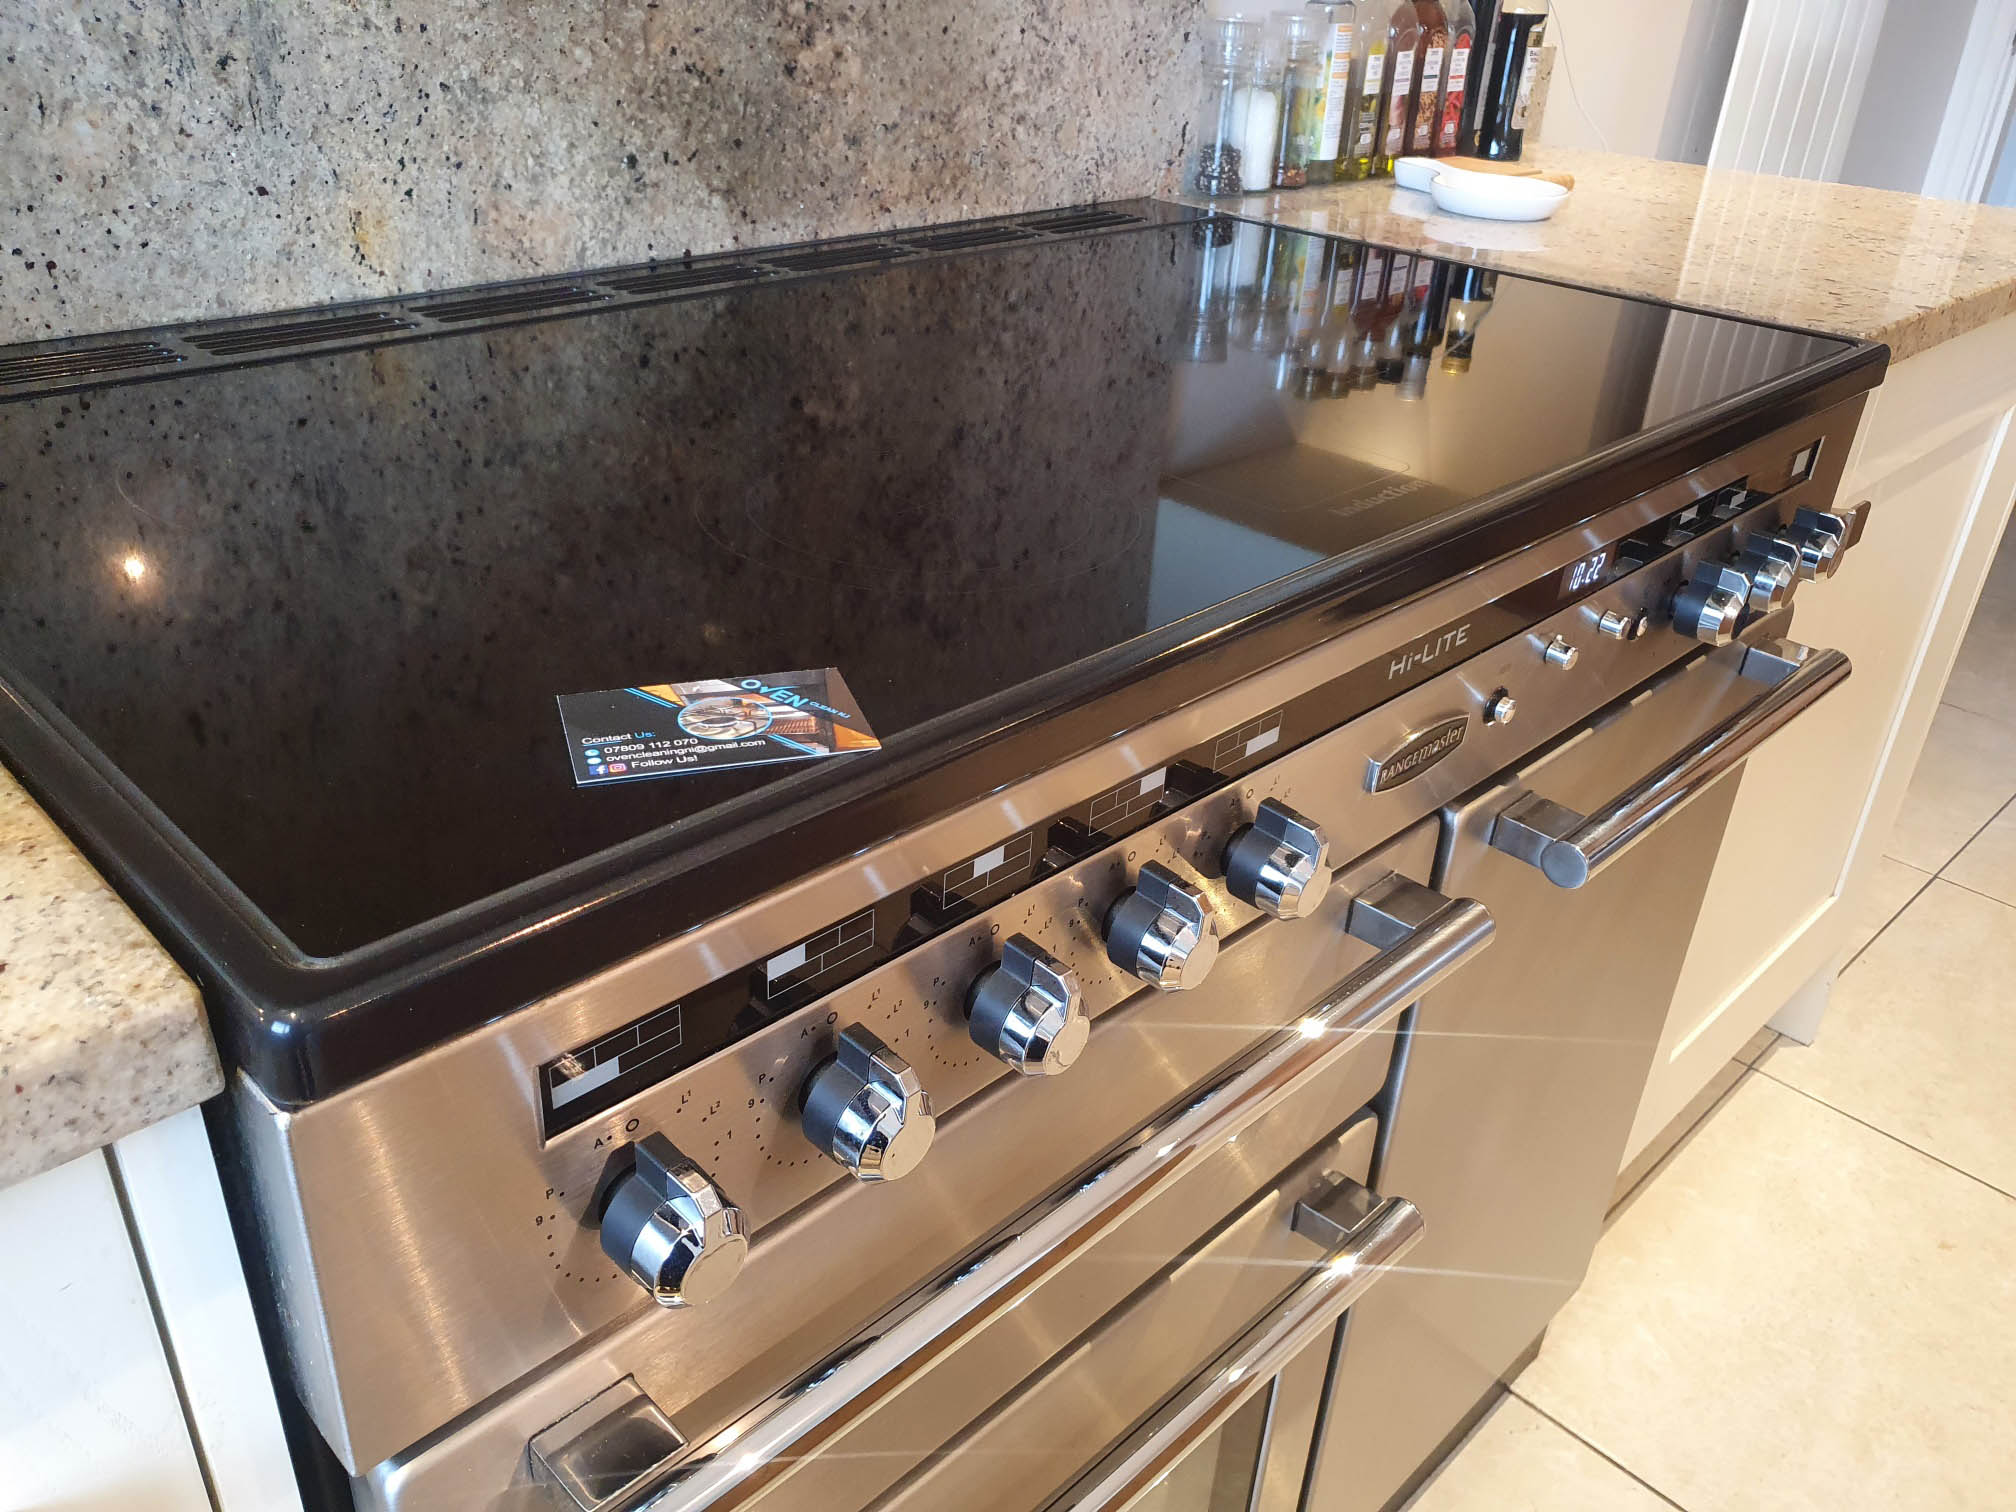 Cleaned Oven Ceramic Hob | Clean Oven Belfast | Oven Cleaning NI | Oven Clean ni | Kitchen Cleaning NI | Oven Cleaning Belfast | Kitchen Appliance Cleaning Belfast | Oven Clean NI